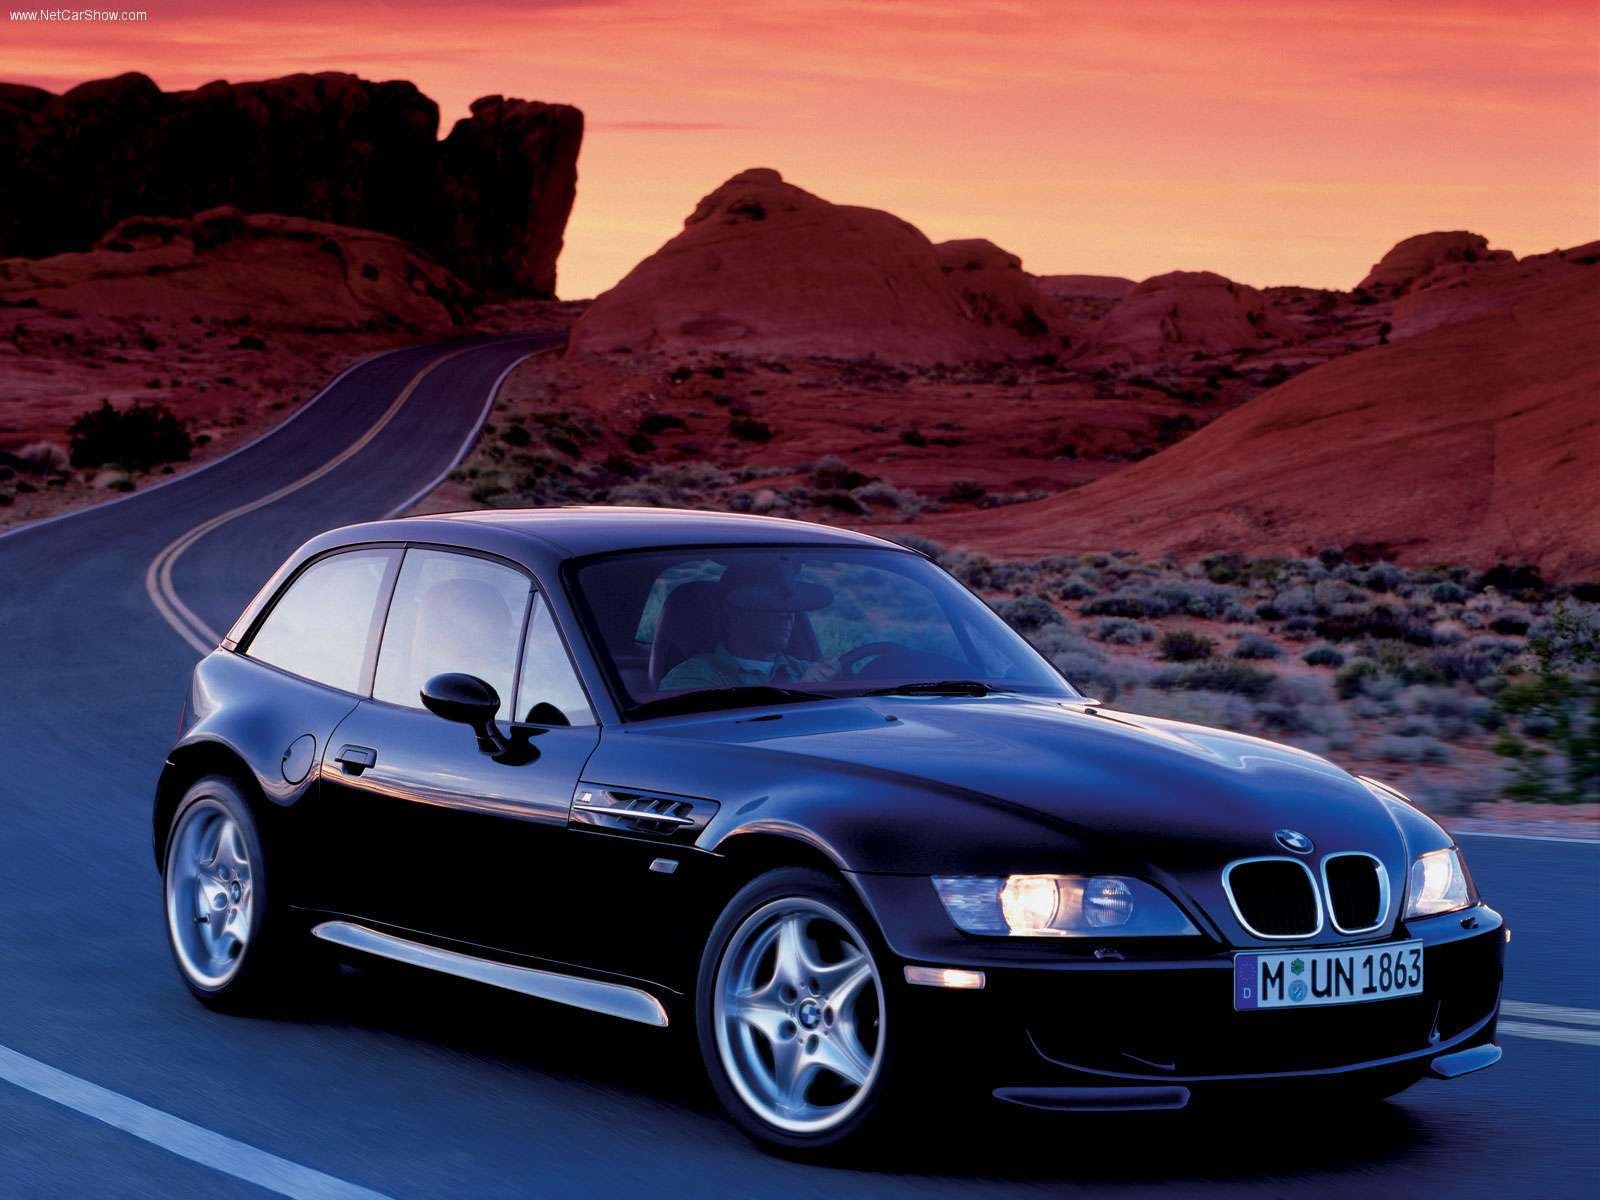 1999, Bmw, Z3 m, Coupe, Cars, Germany Wallpaper